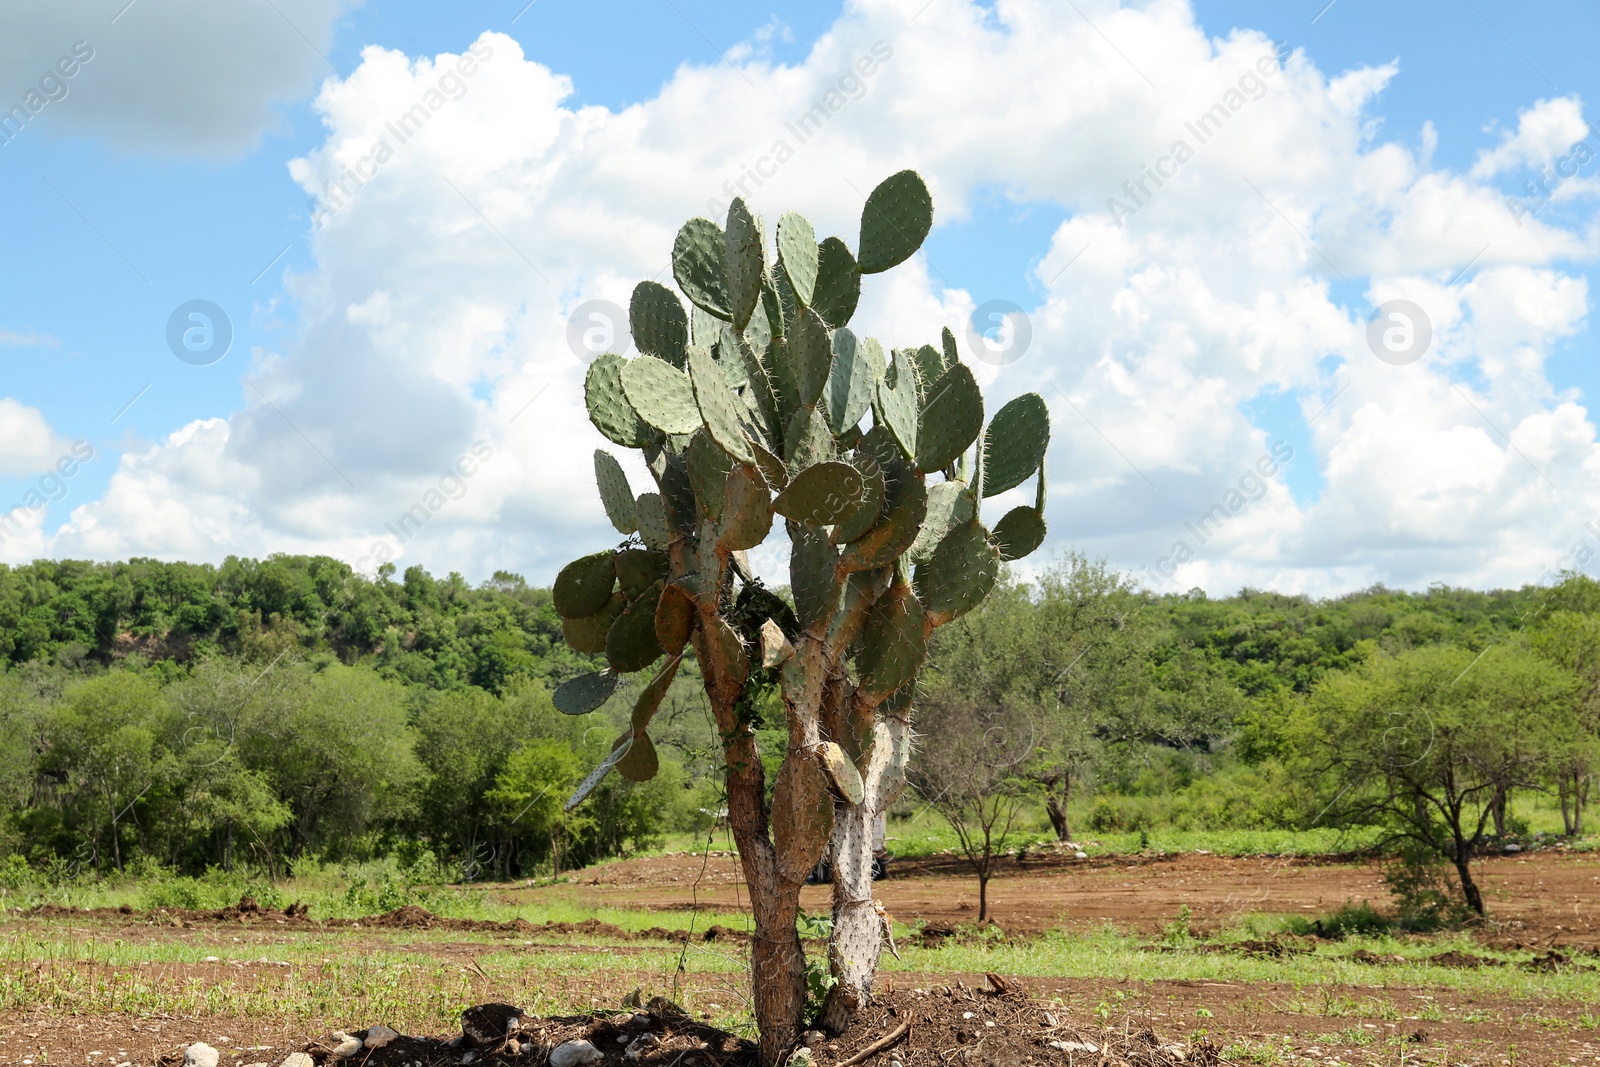 Photo of Beautiful green prickly pear cactus growing outdoors